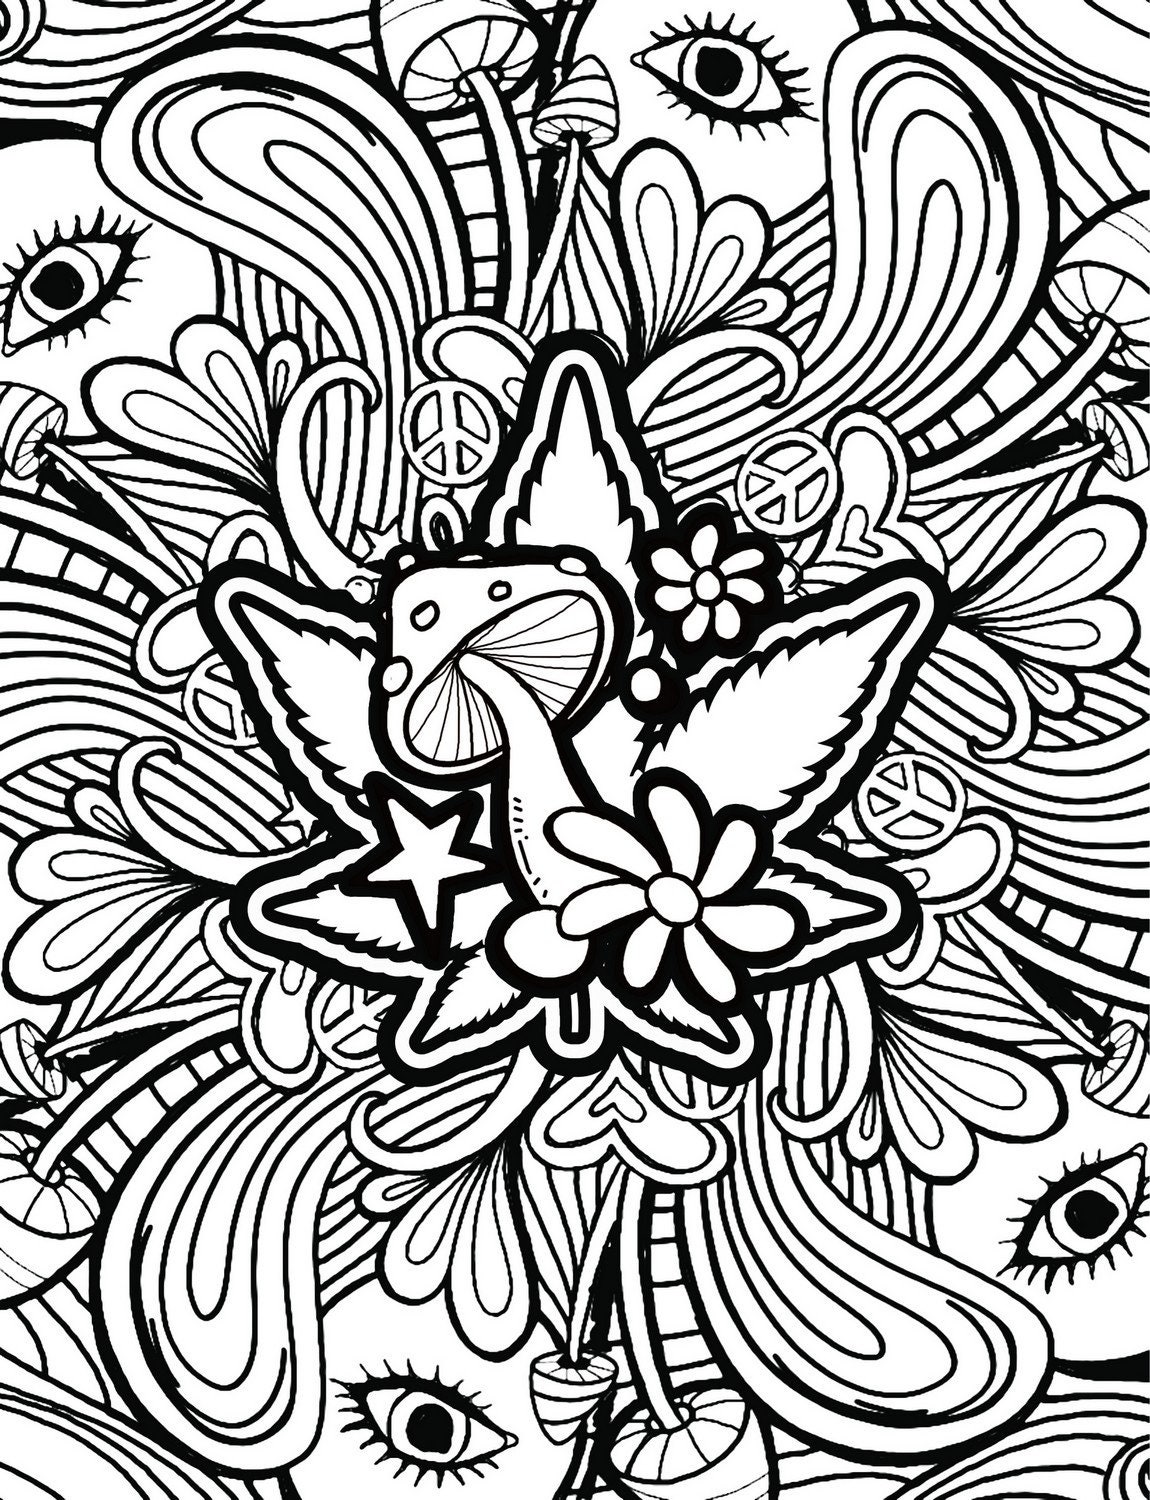 Stoner Coloring Book for Adult : 39 Psychedelic Coloring Pages